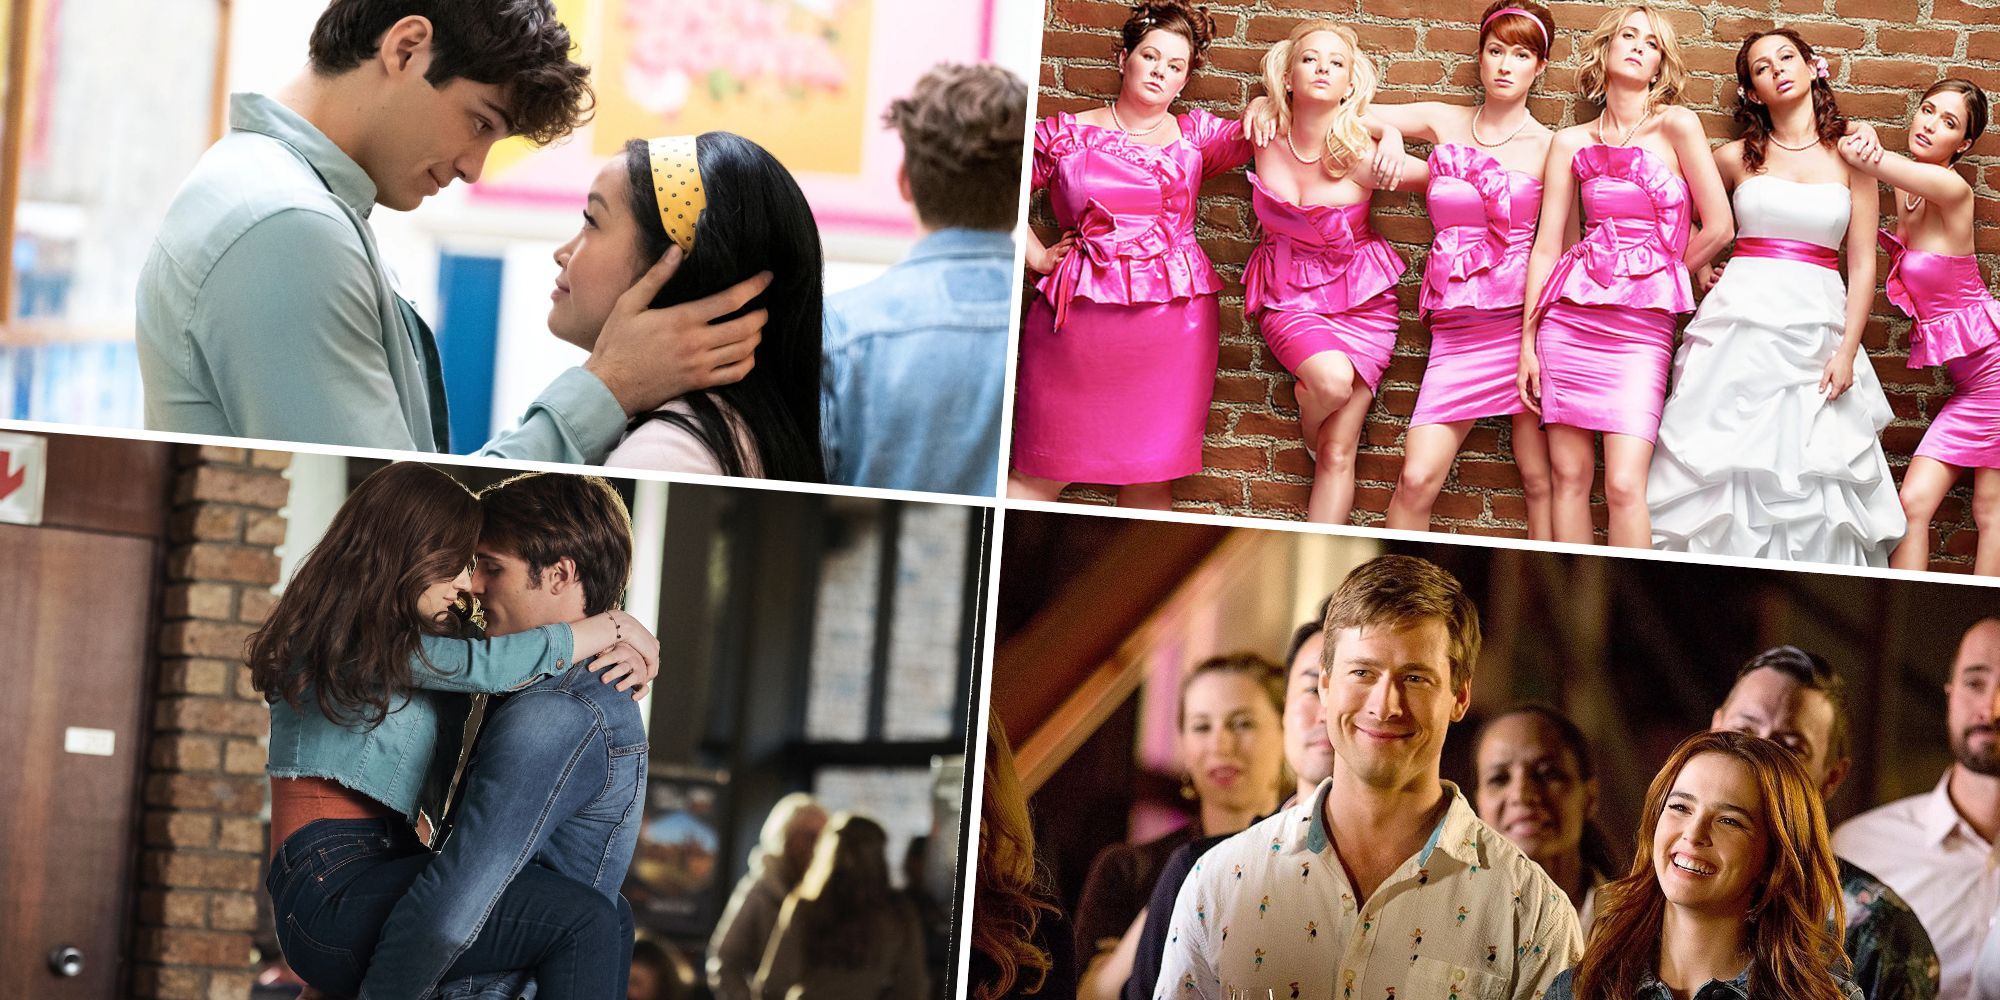 10 Amazing Movies For Your Next Girls’ Night